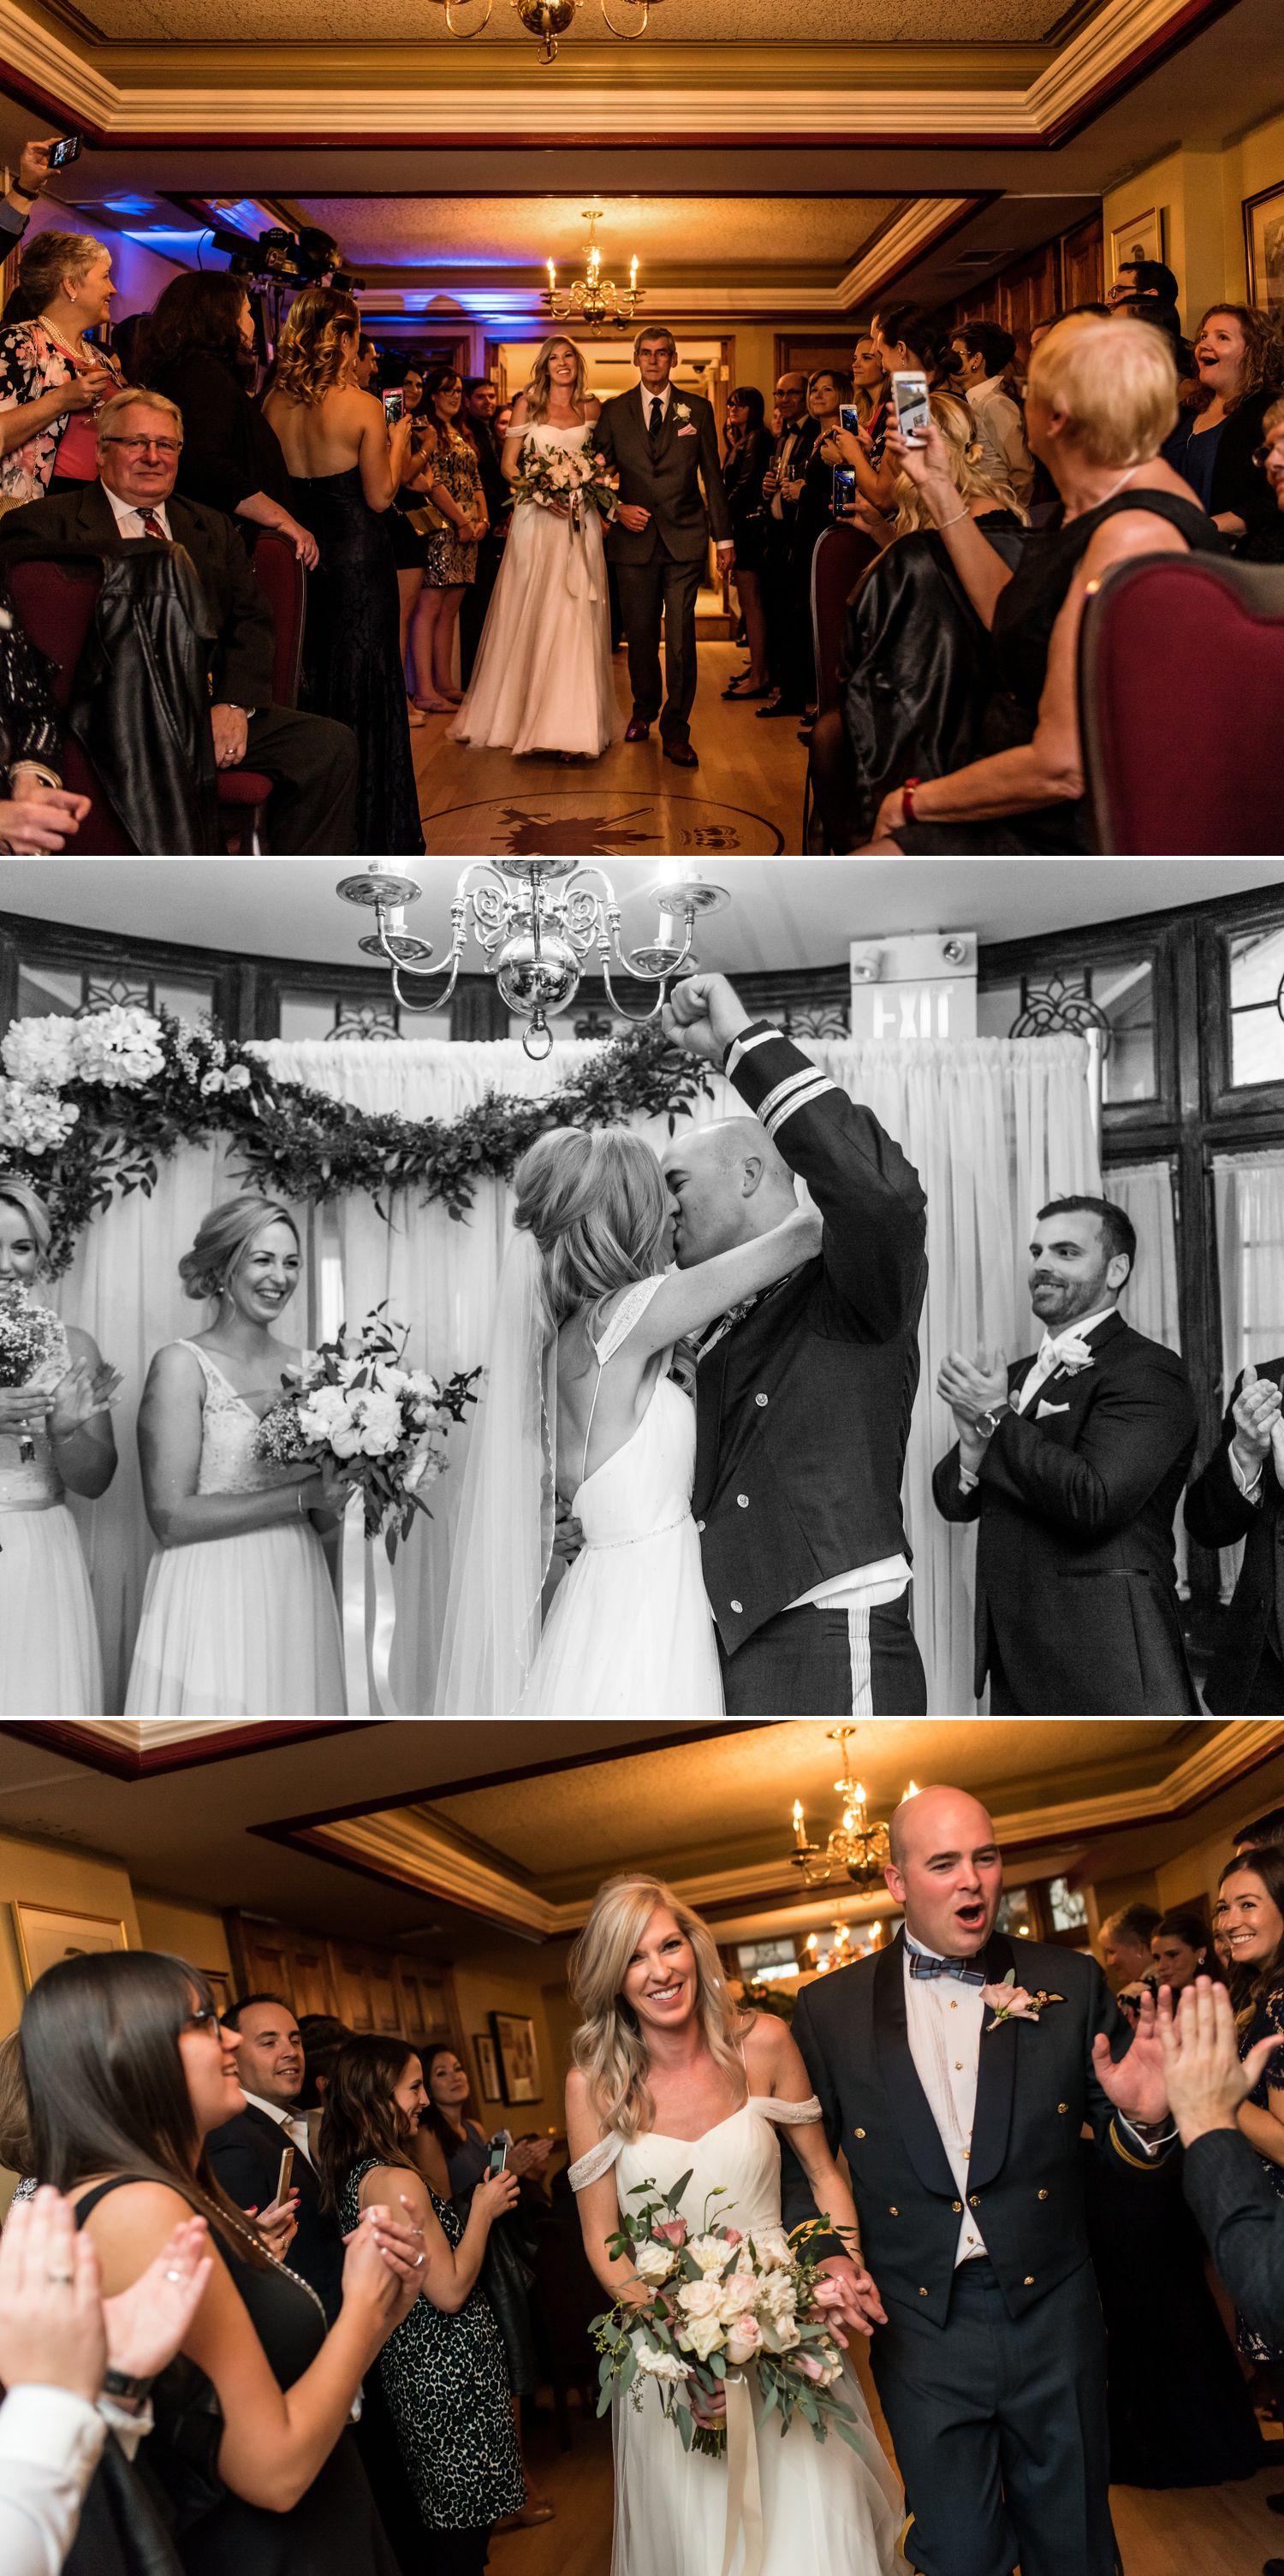 candid moments at an army mess wedding in ottawa ontario